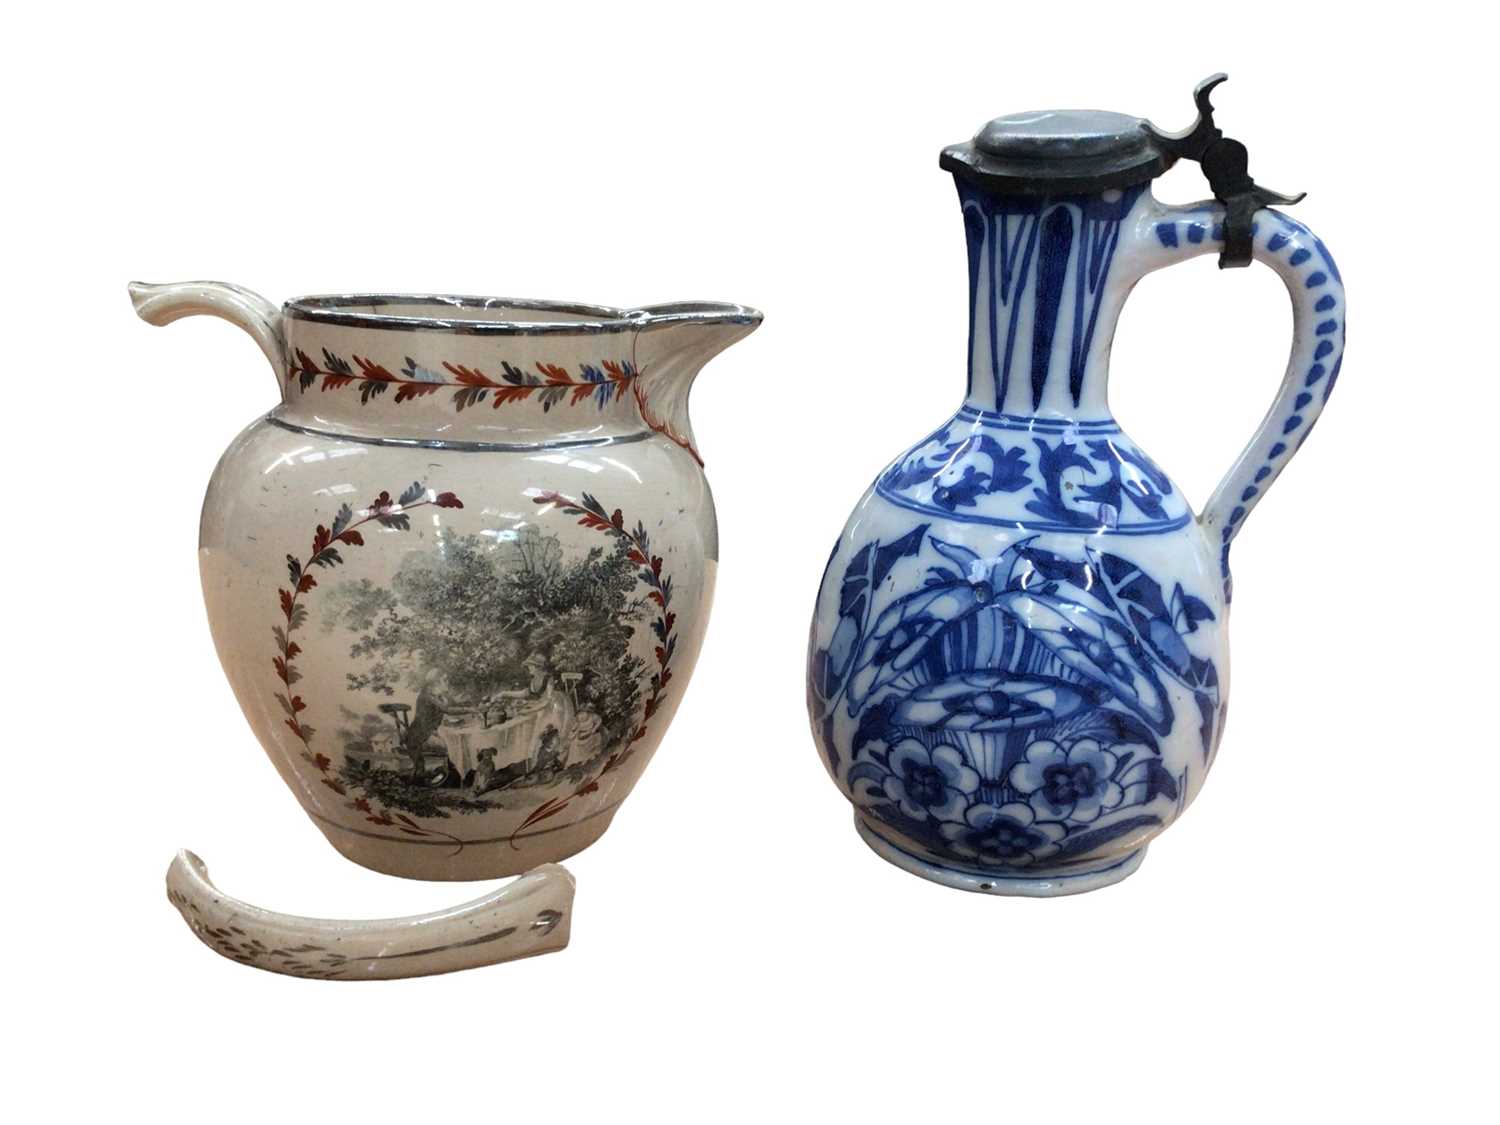 Lot 24 - Early 19th century English pottery jug, and a delft jug